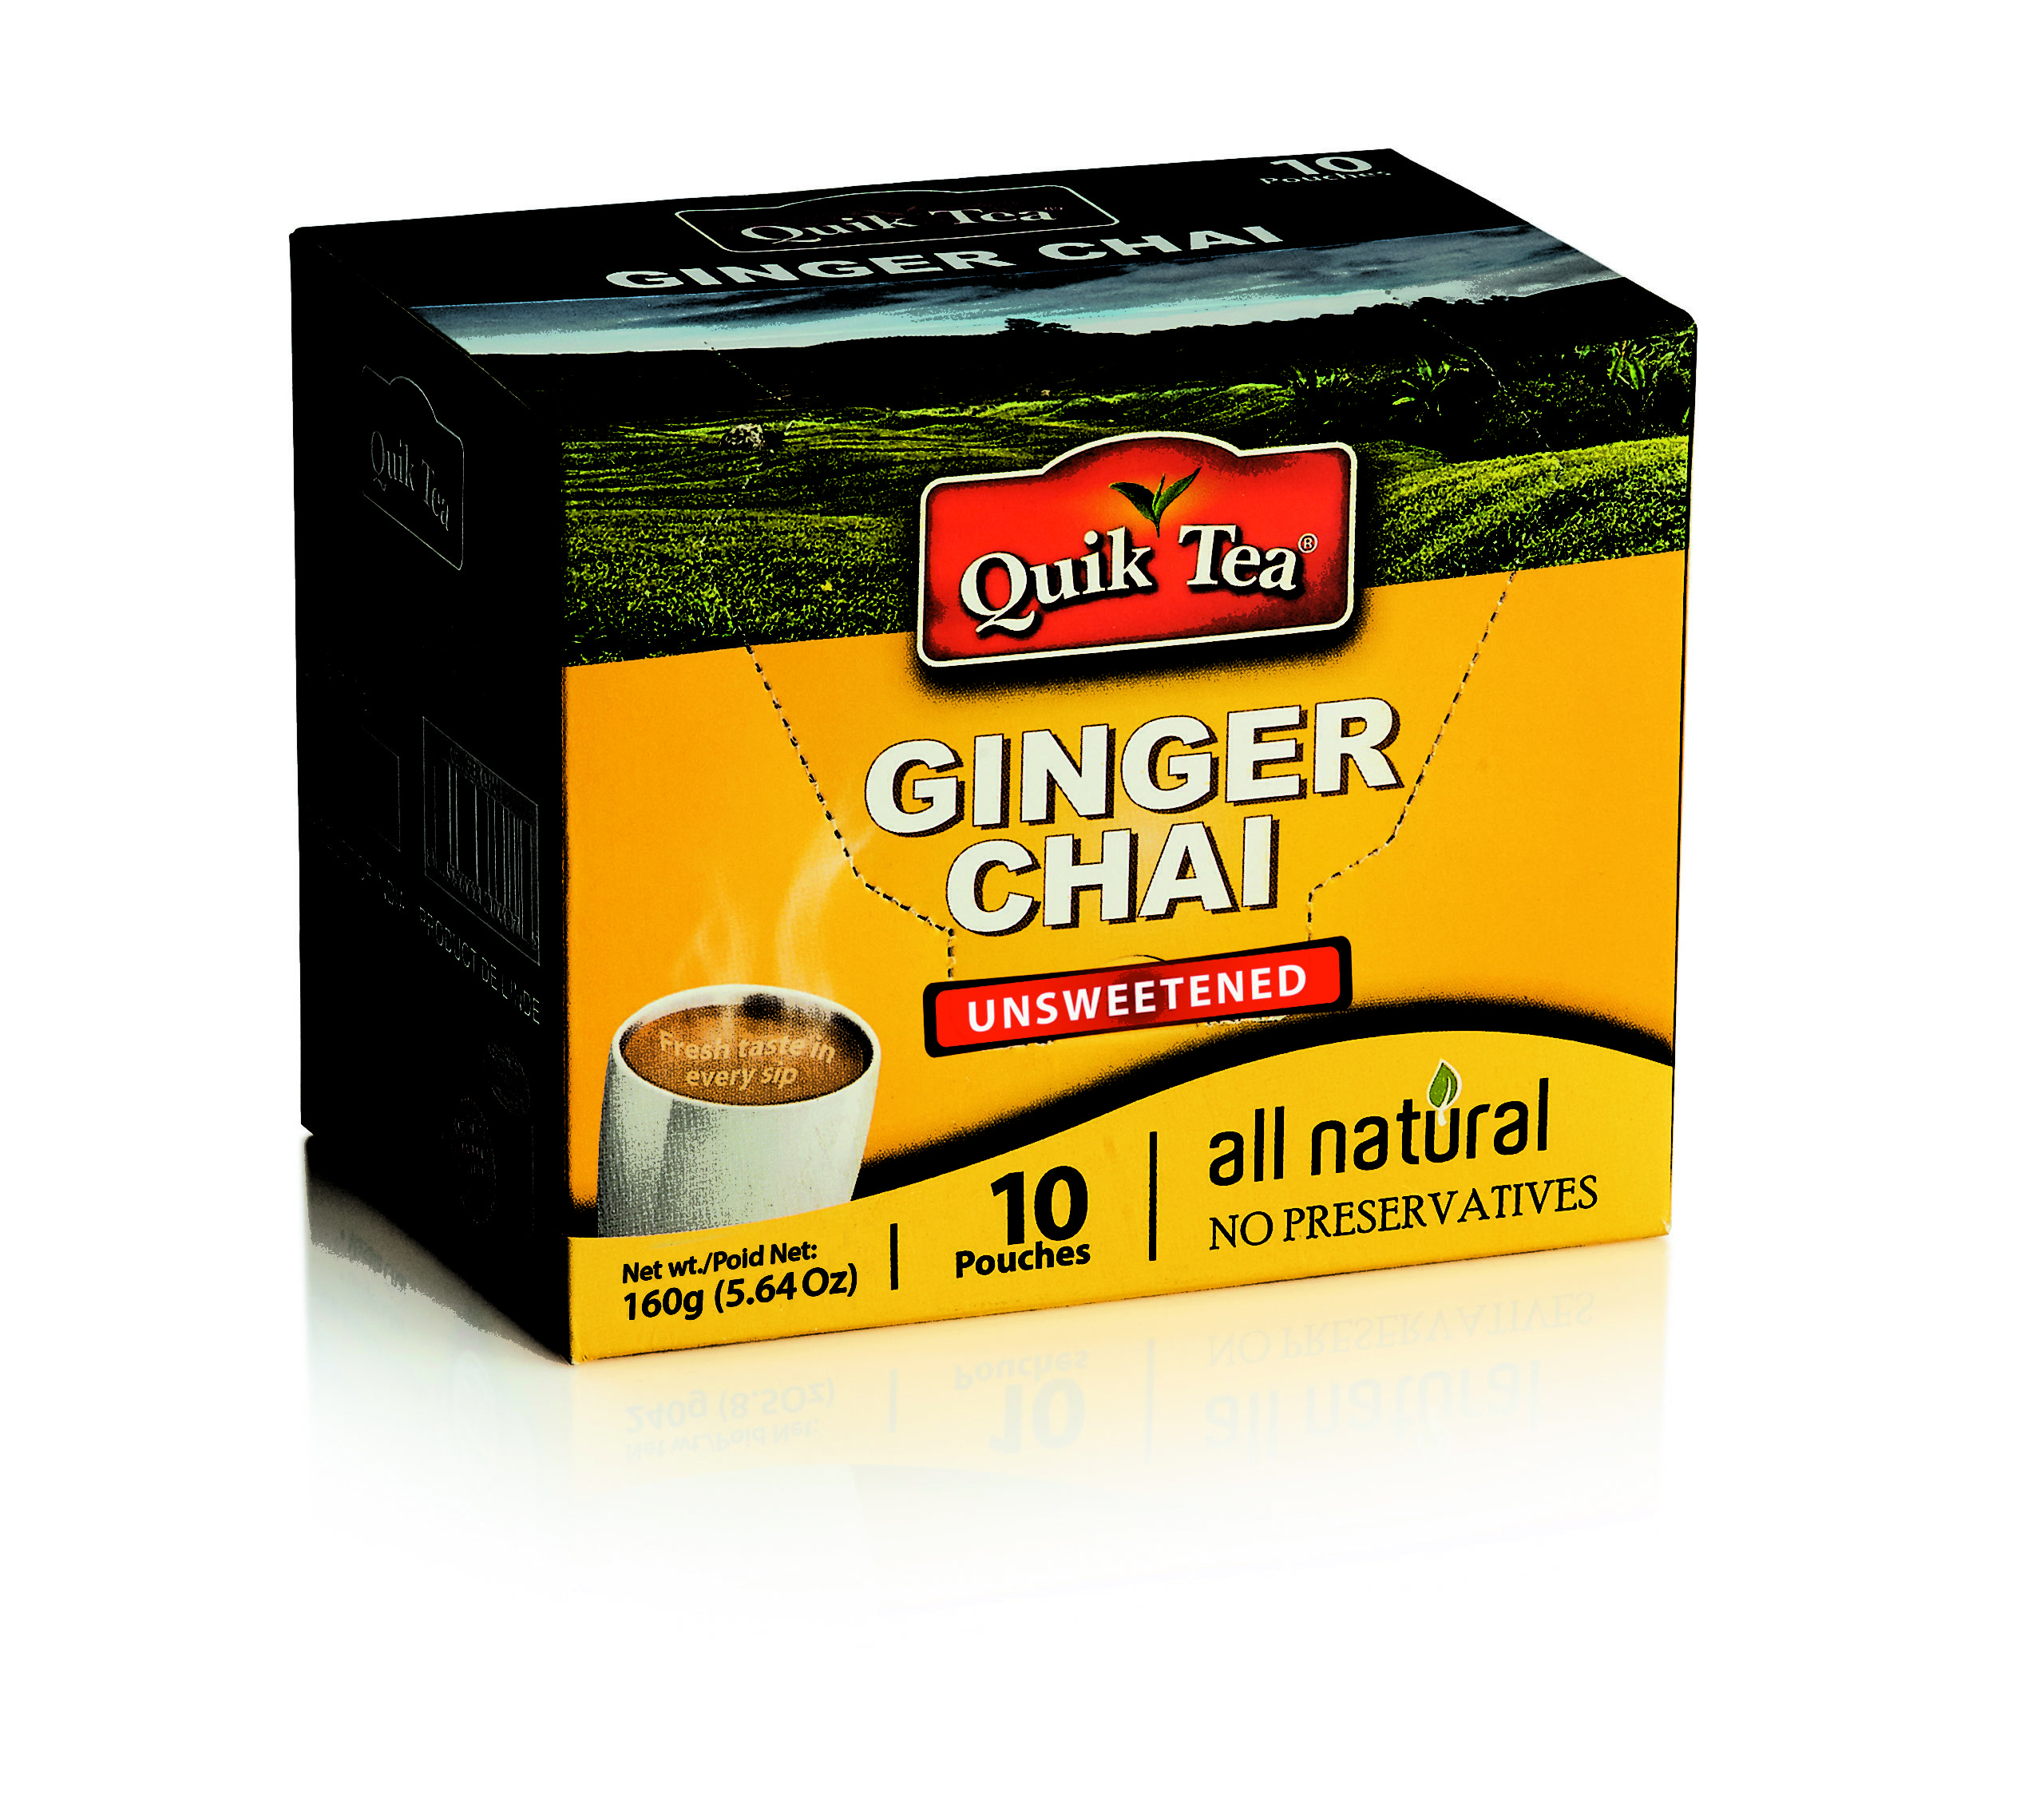 Unsweetened Ginger Chai Latte - 10 pack